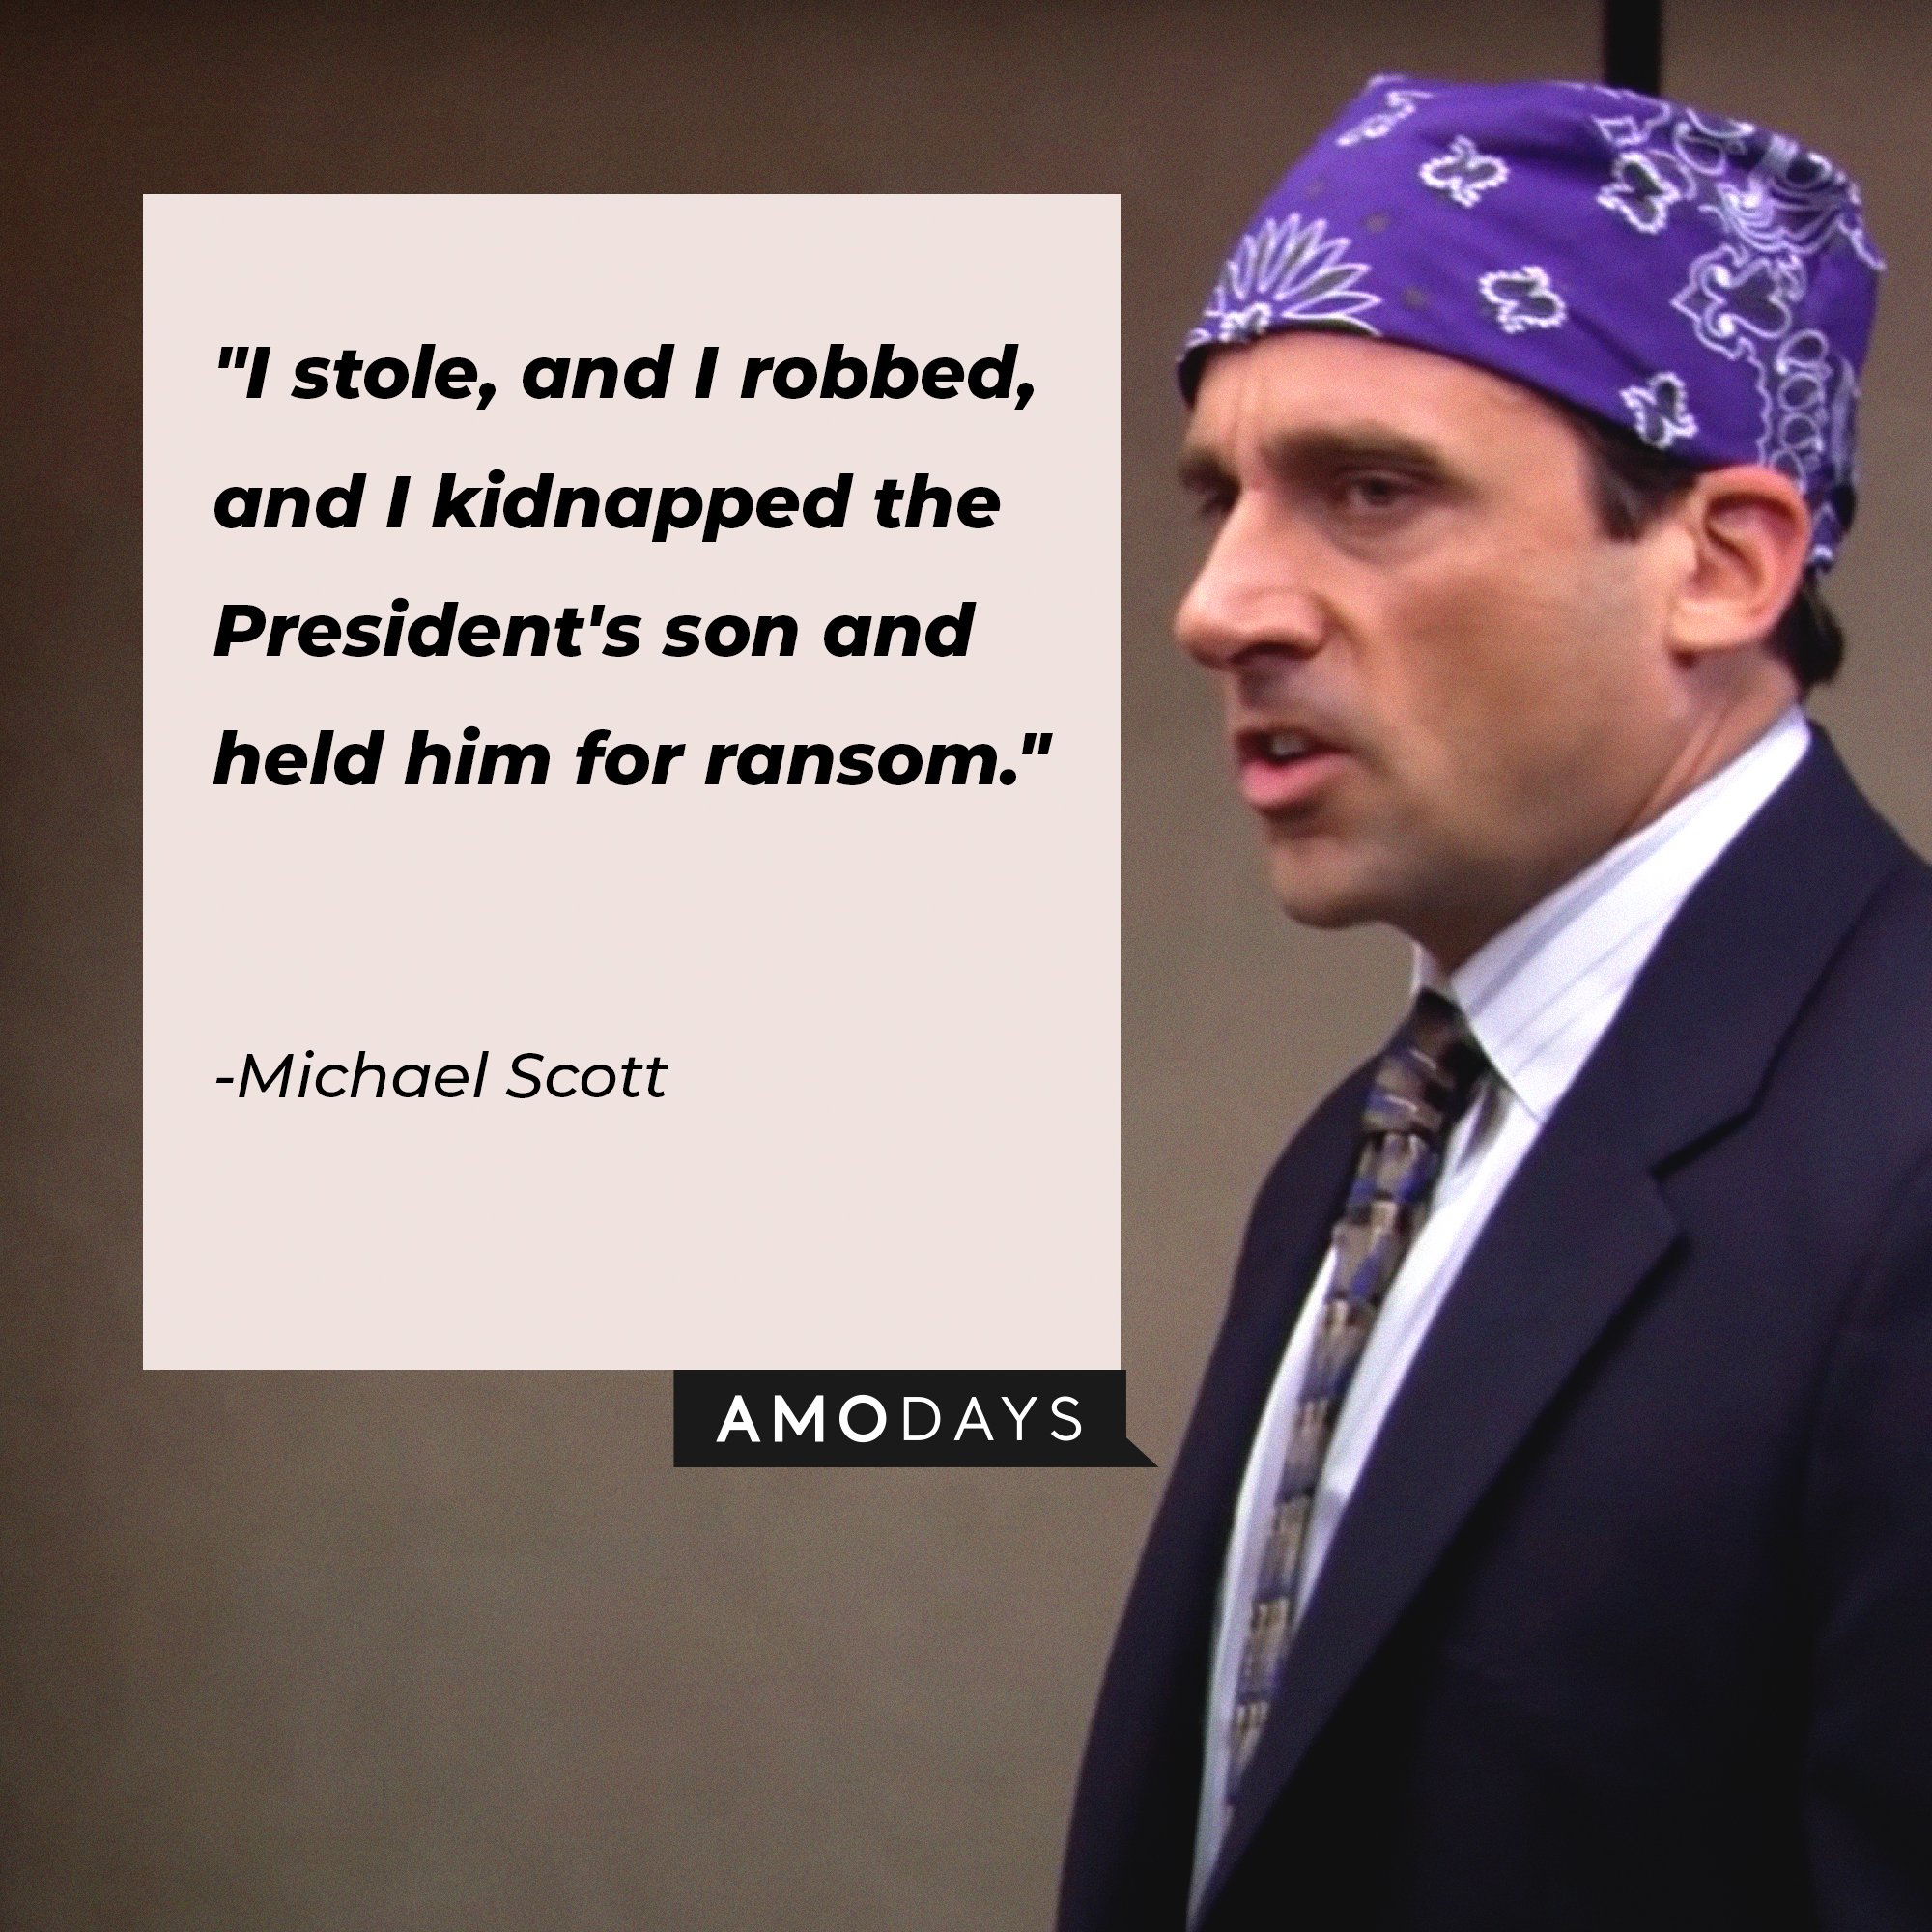 Michael Scott’s quote: "I stole, and I robbed, and I kidnapped the President's son and held him for ransom." | Image: AmoDays